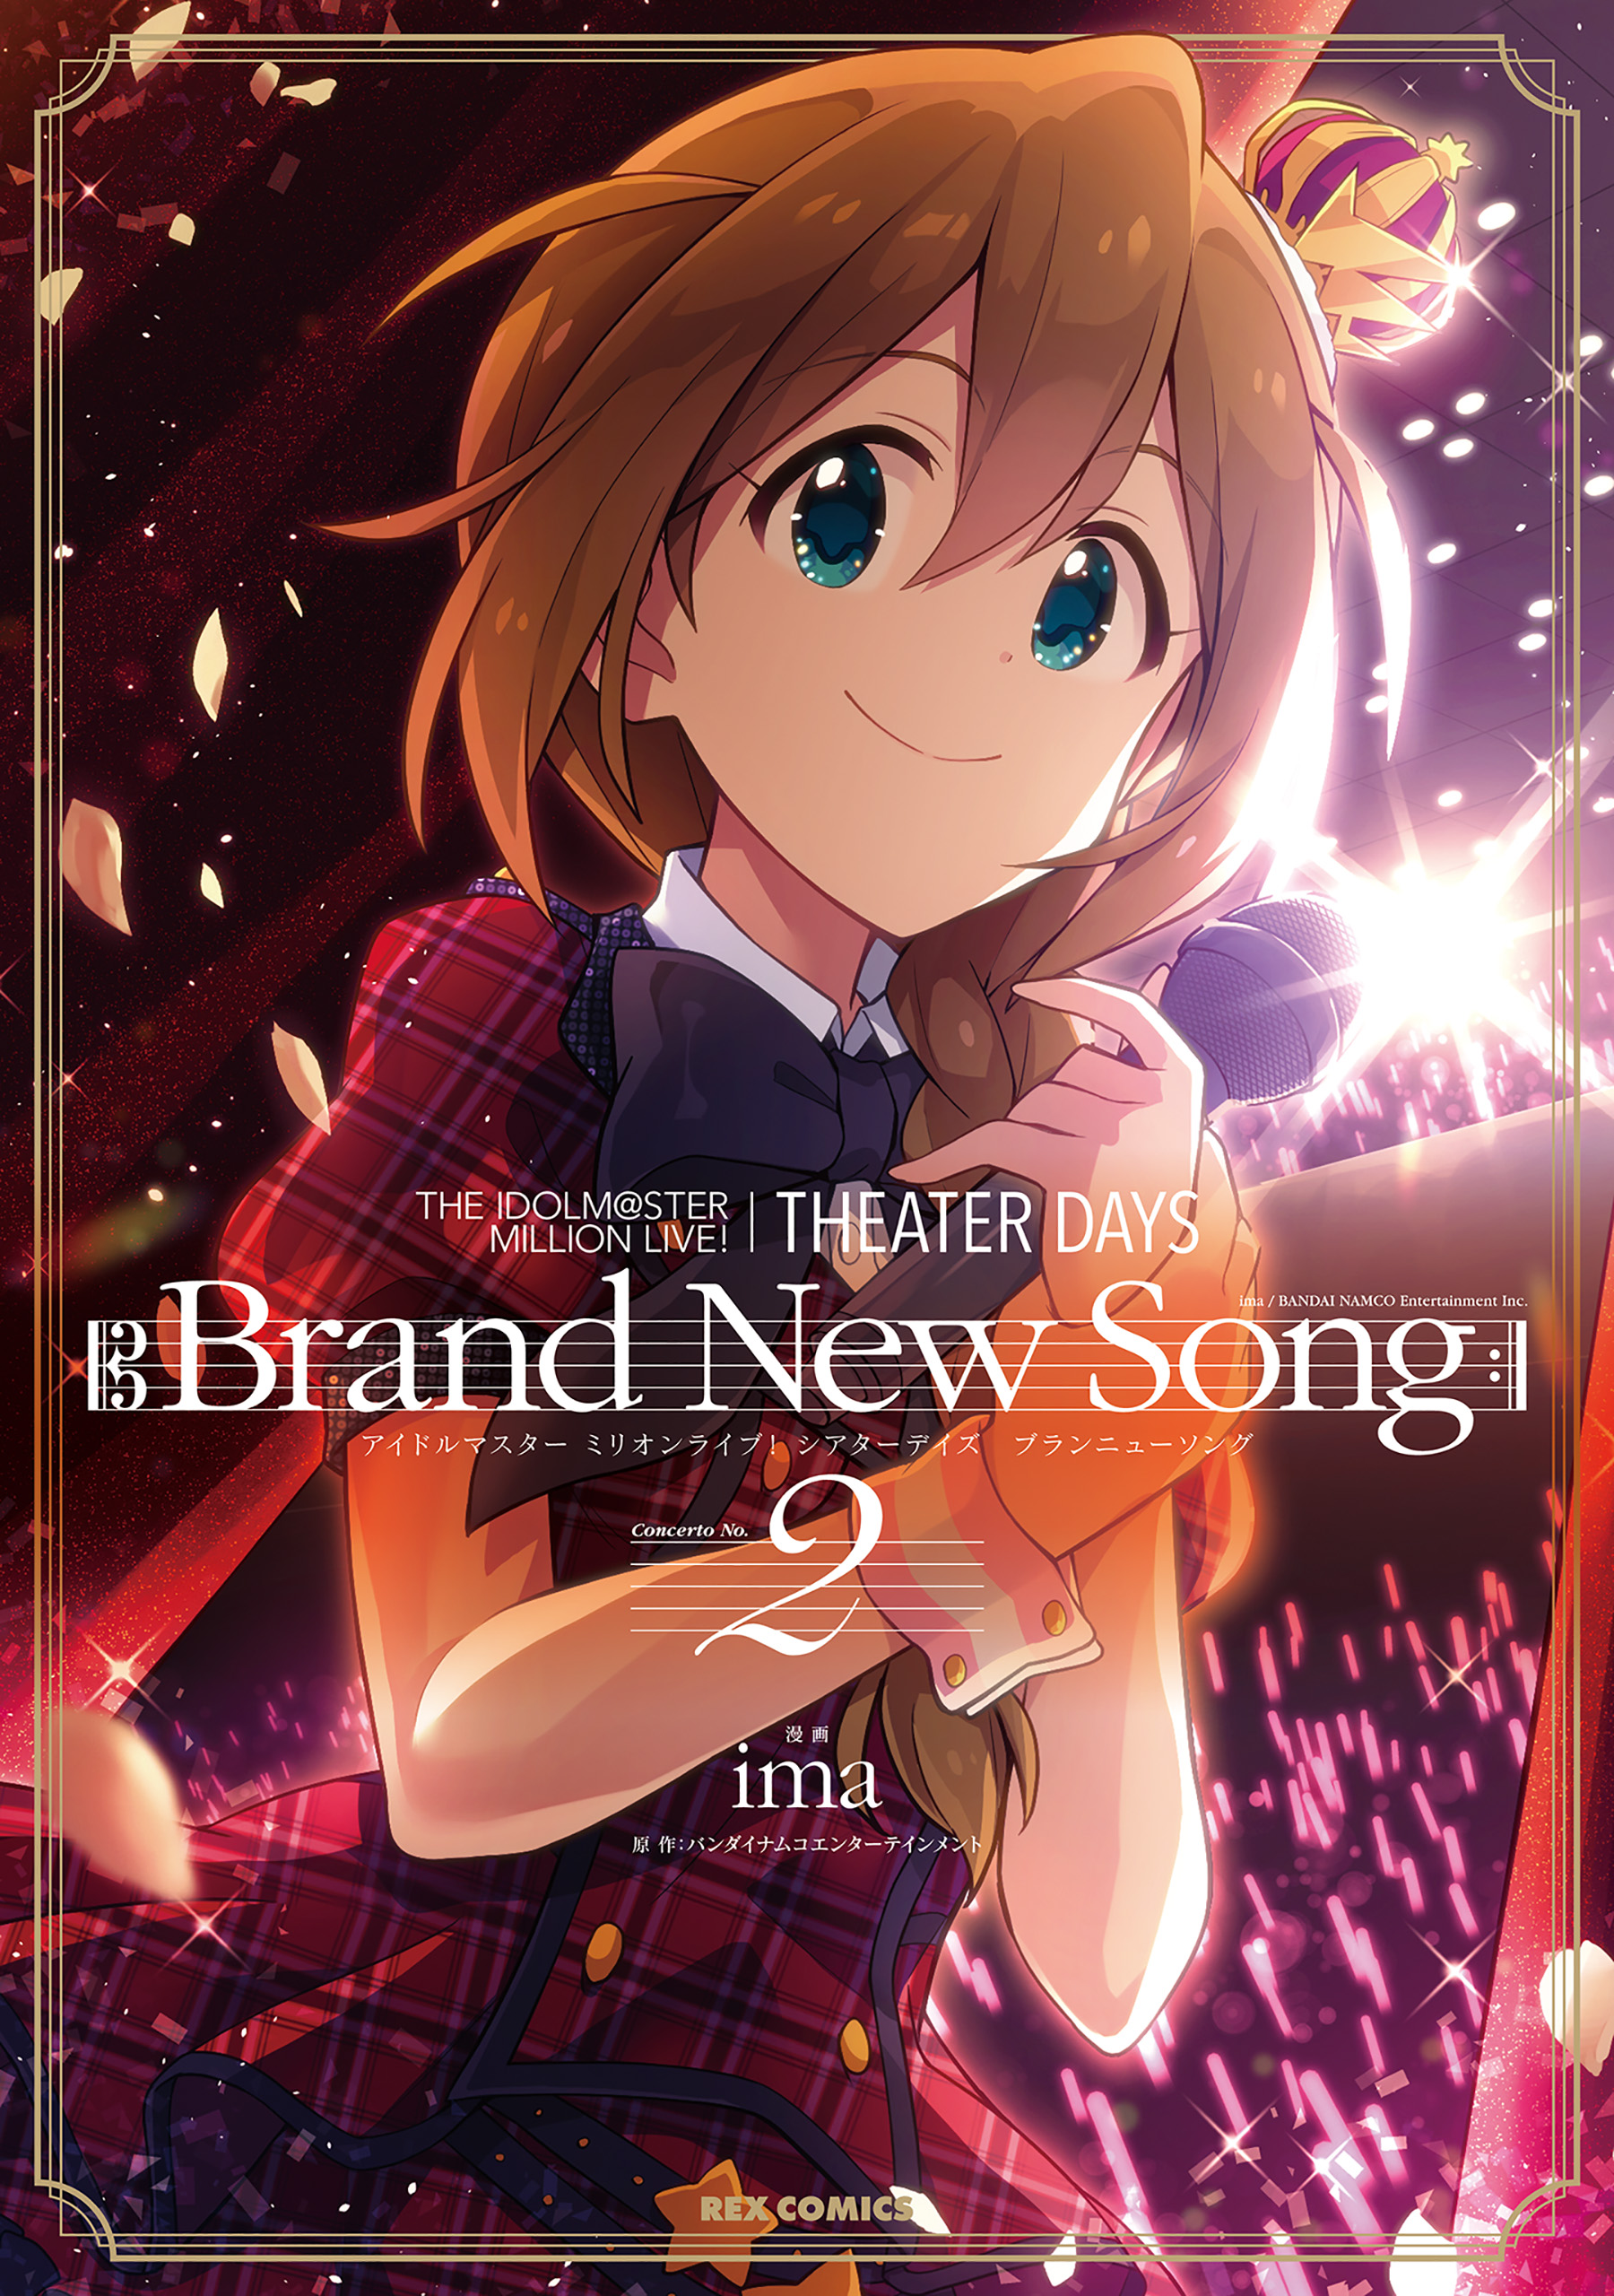 THE IDOLM@STER MILLION LIVE! THEATER DAYS Brand New Song: 2 - ima